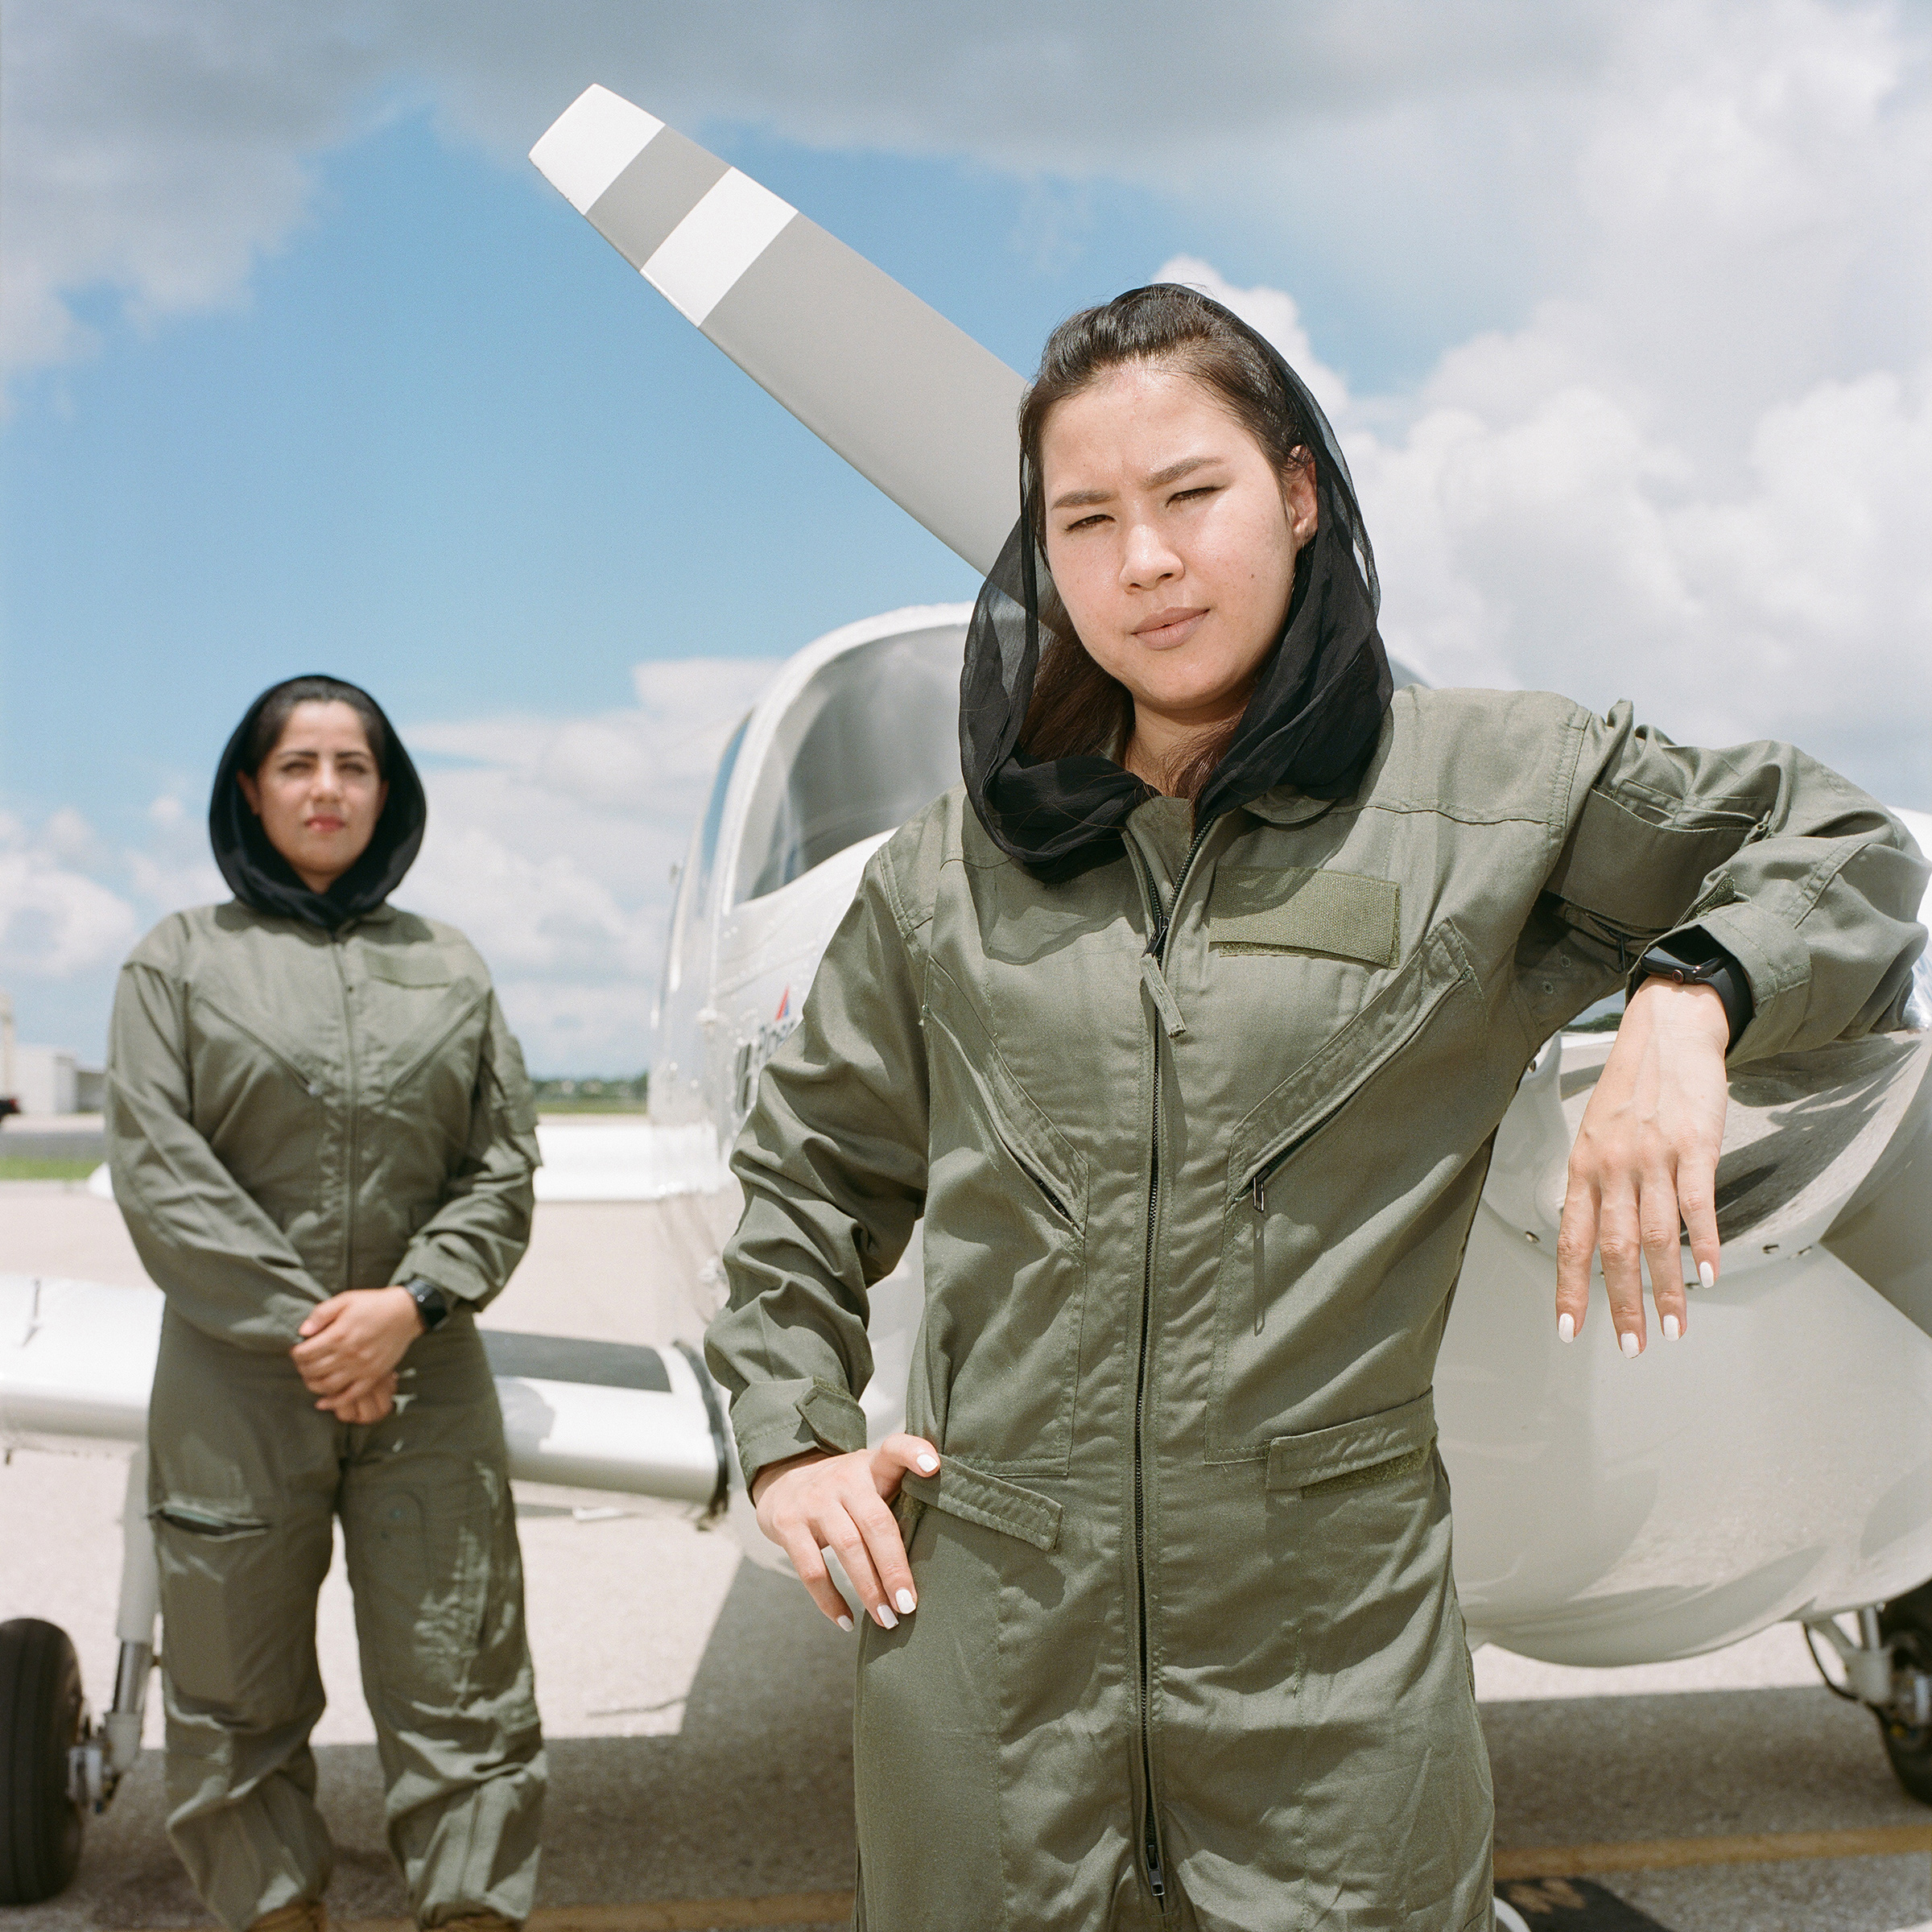 Hasina Najibi and Raihana Rahimi wear their old Afghan Air Force uniforms while visiting the Paragon pilot training school in Fort Myers, Fla.